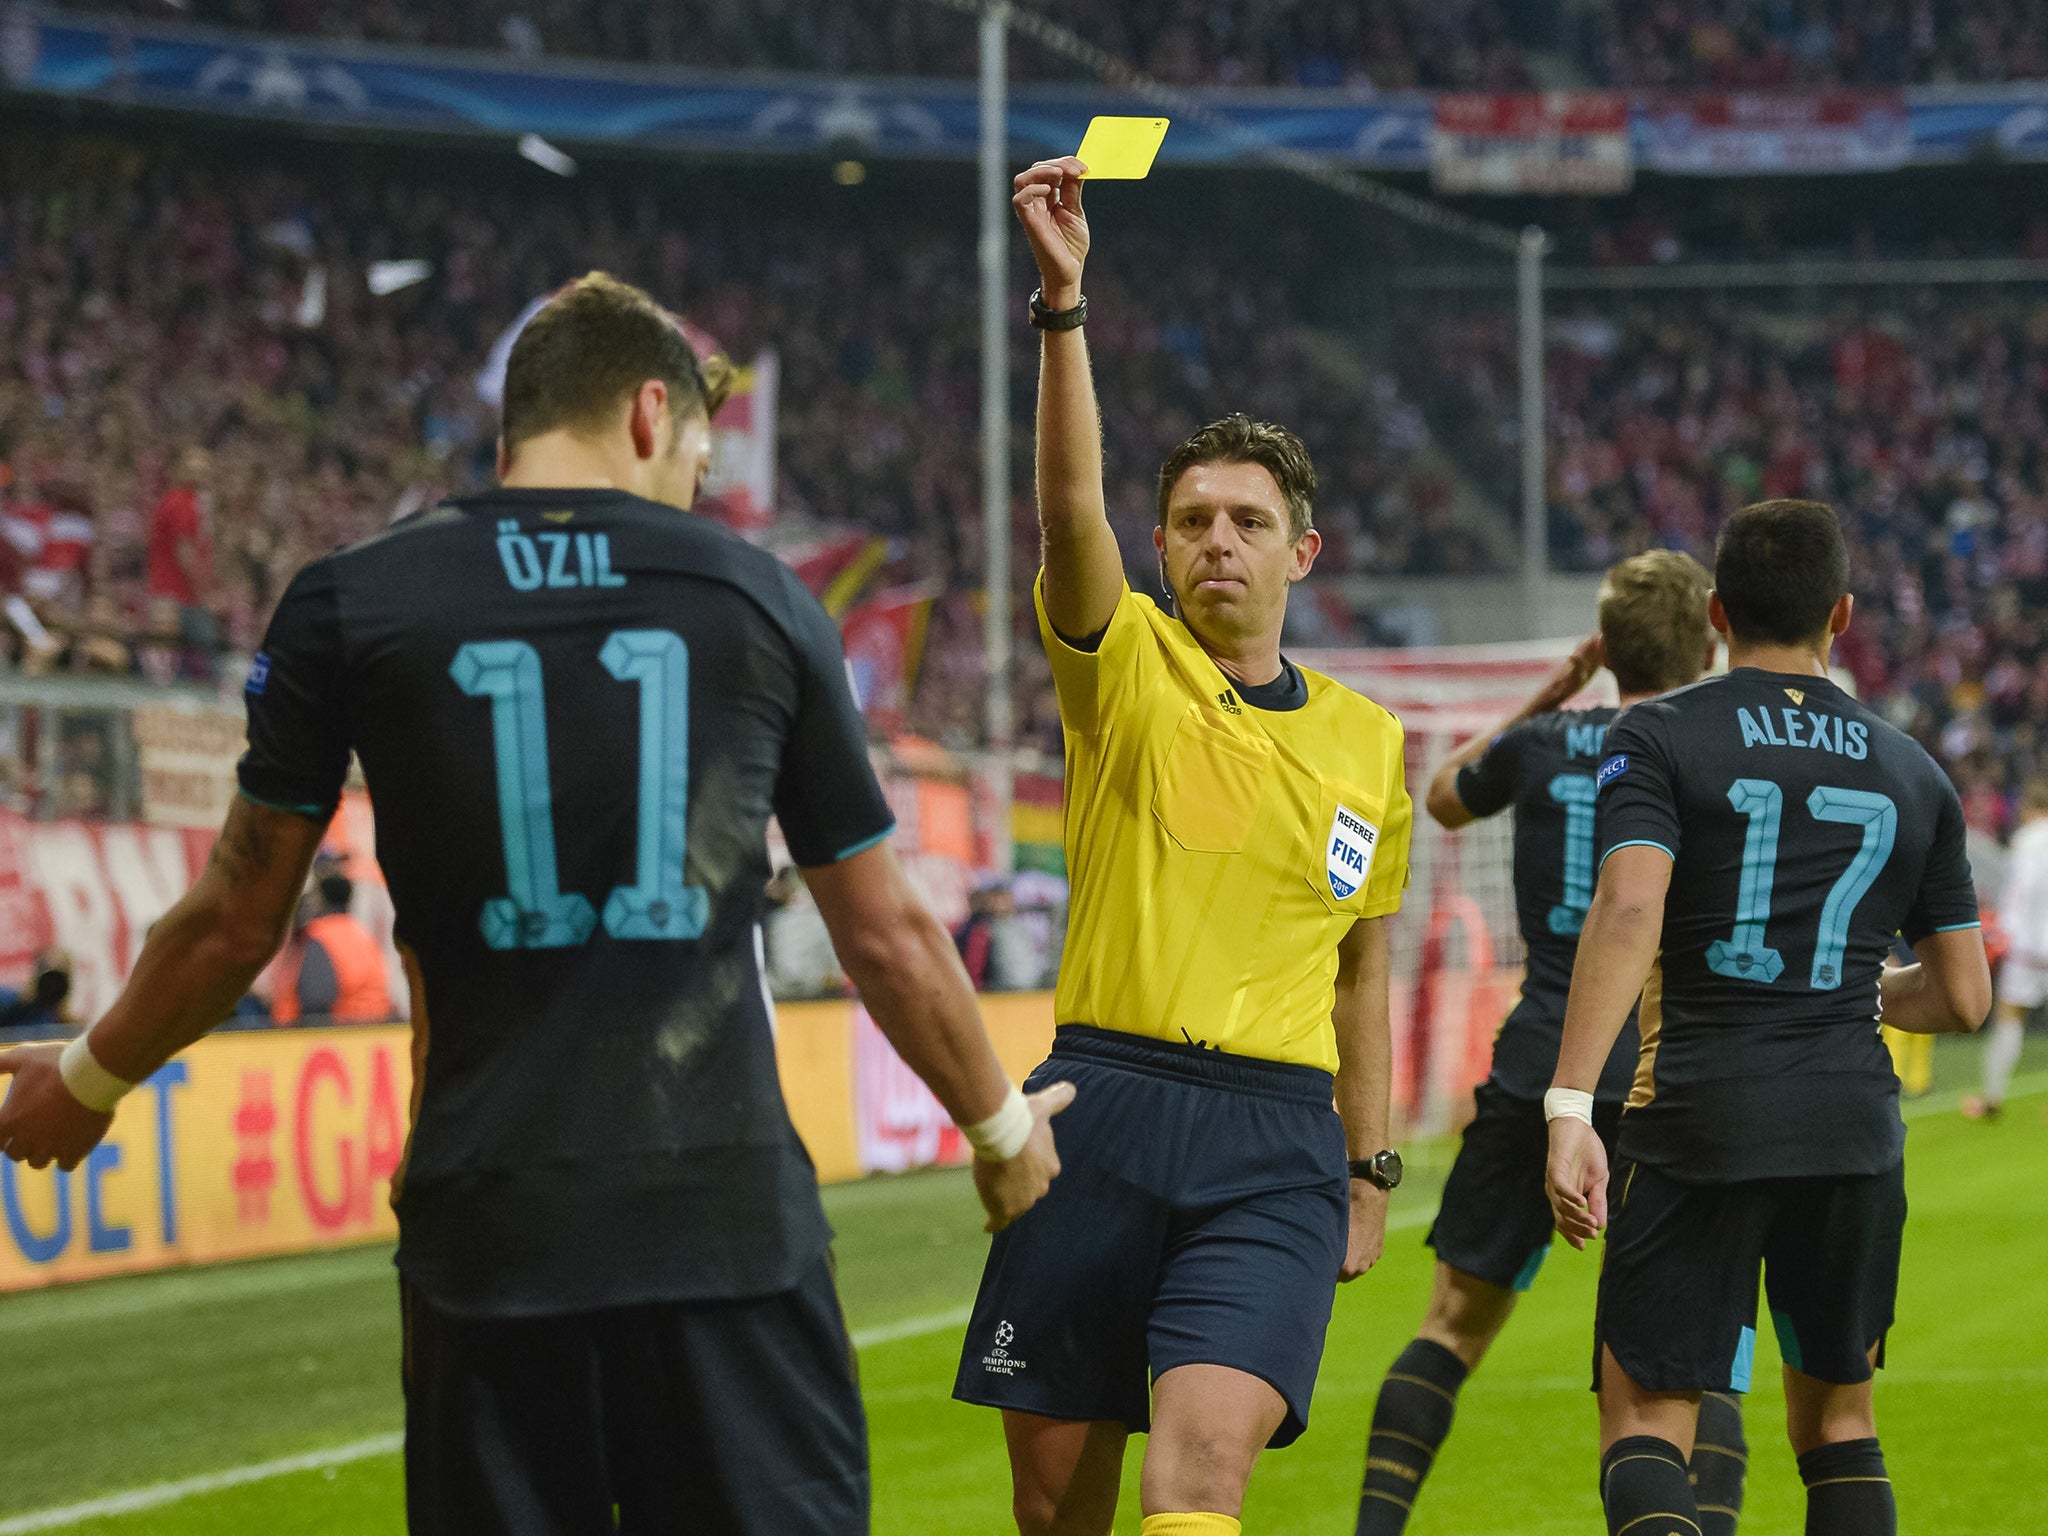 Mesut Ozil receives a yellow card for a hand-ball